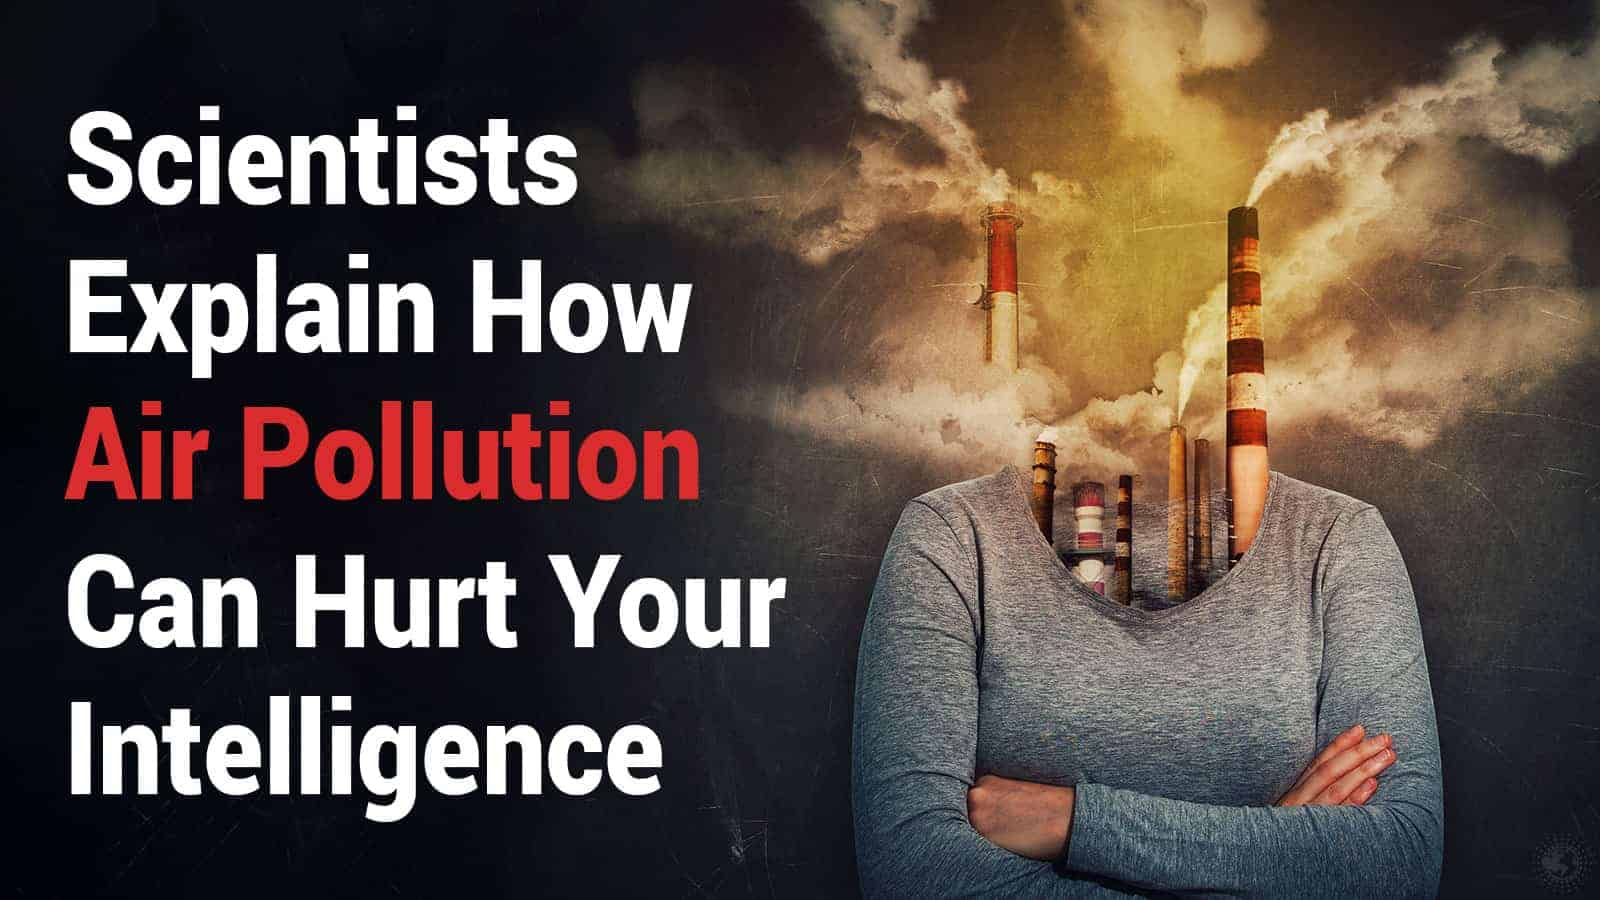 Scientists Explain How Air Pollution Can Hurt Your Intelligence